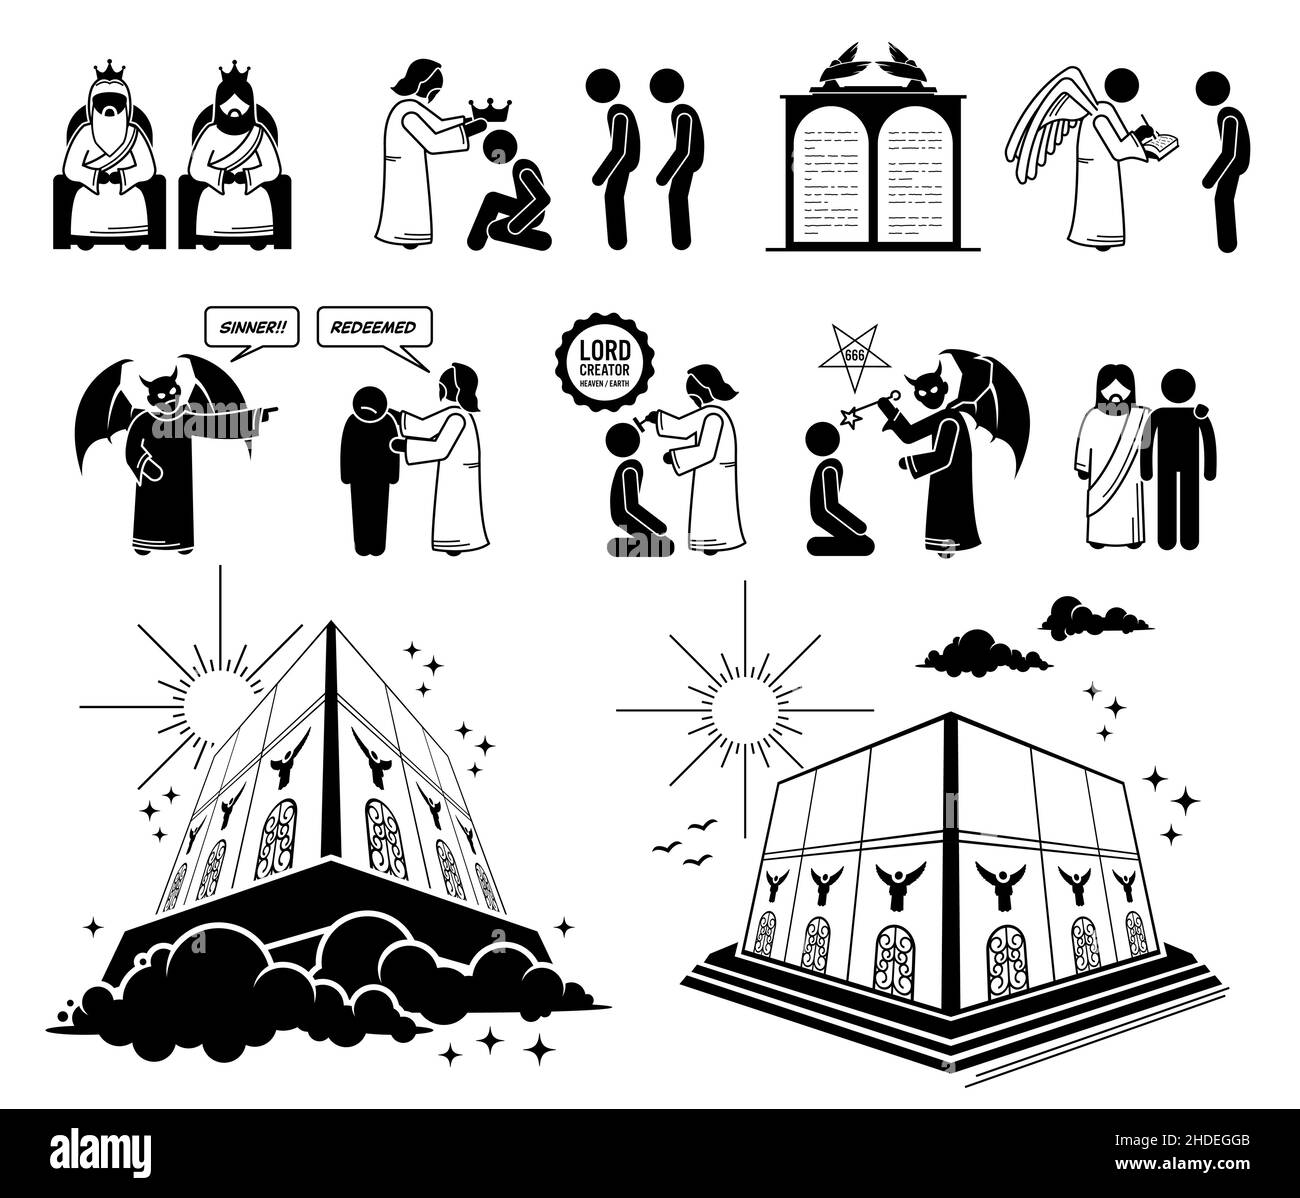 Judgment day or Final Day of Reckoning and New Jerusalem in Christian bible prophecy. Vector illustrations depict Jesus Christ, Satan, and God judging Stock Vector